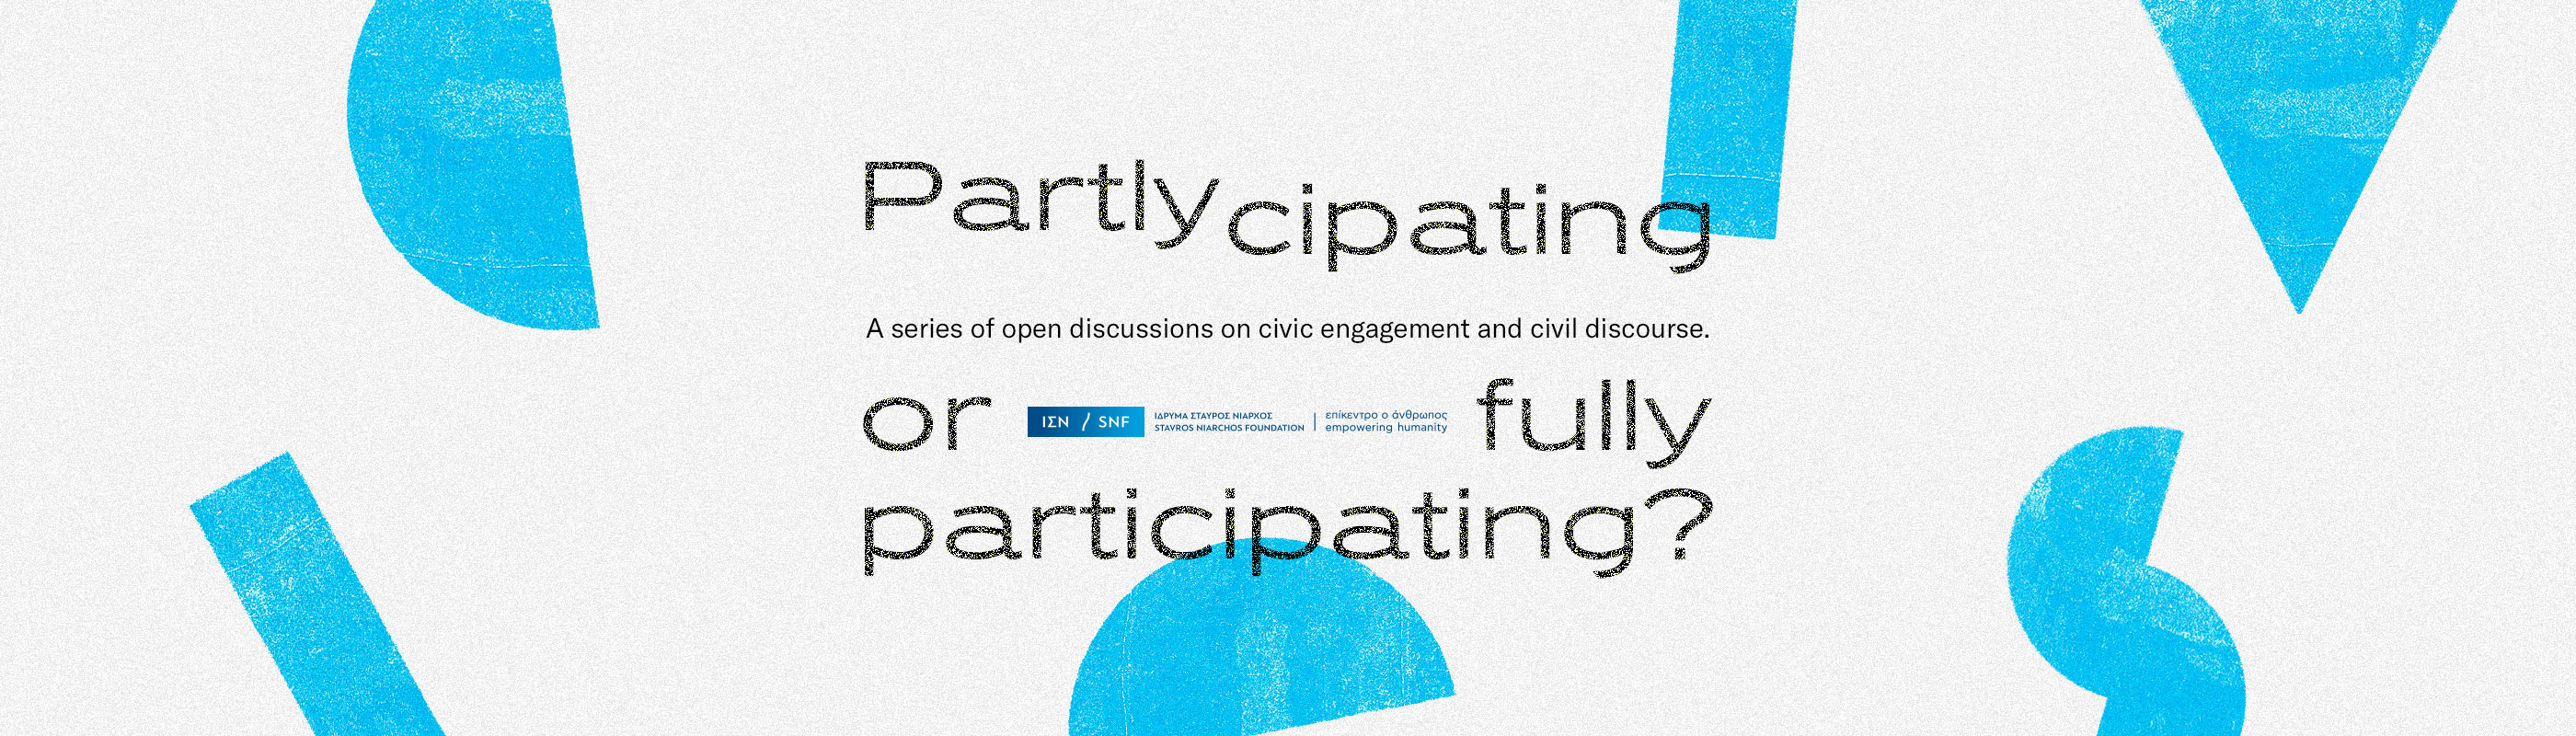 Partly-cipating or fully participating?